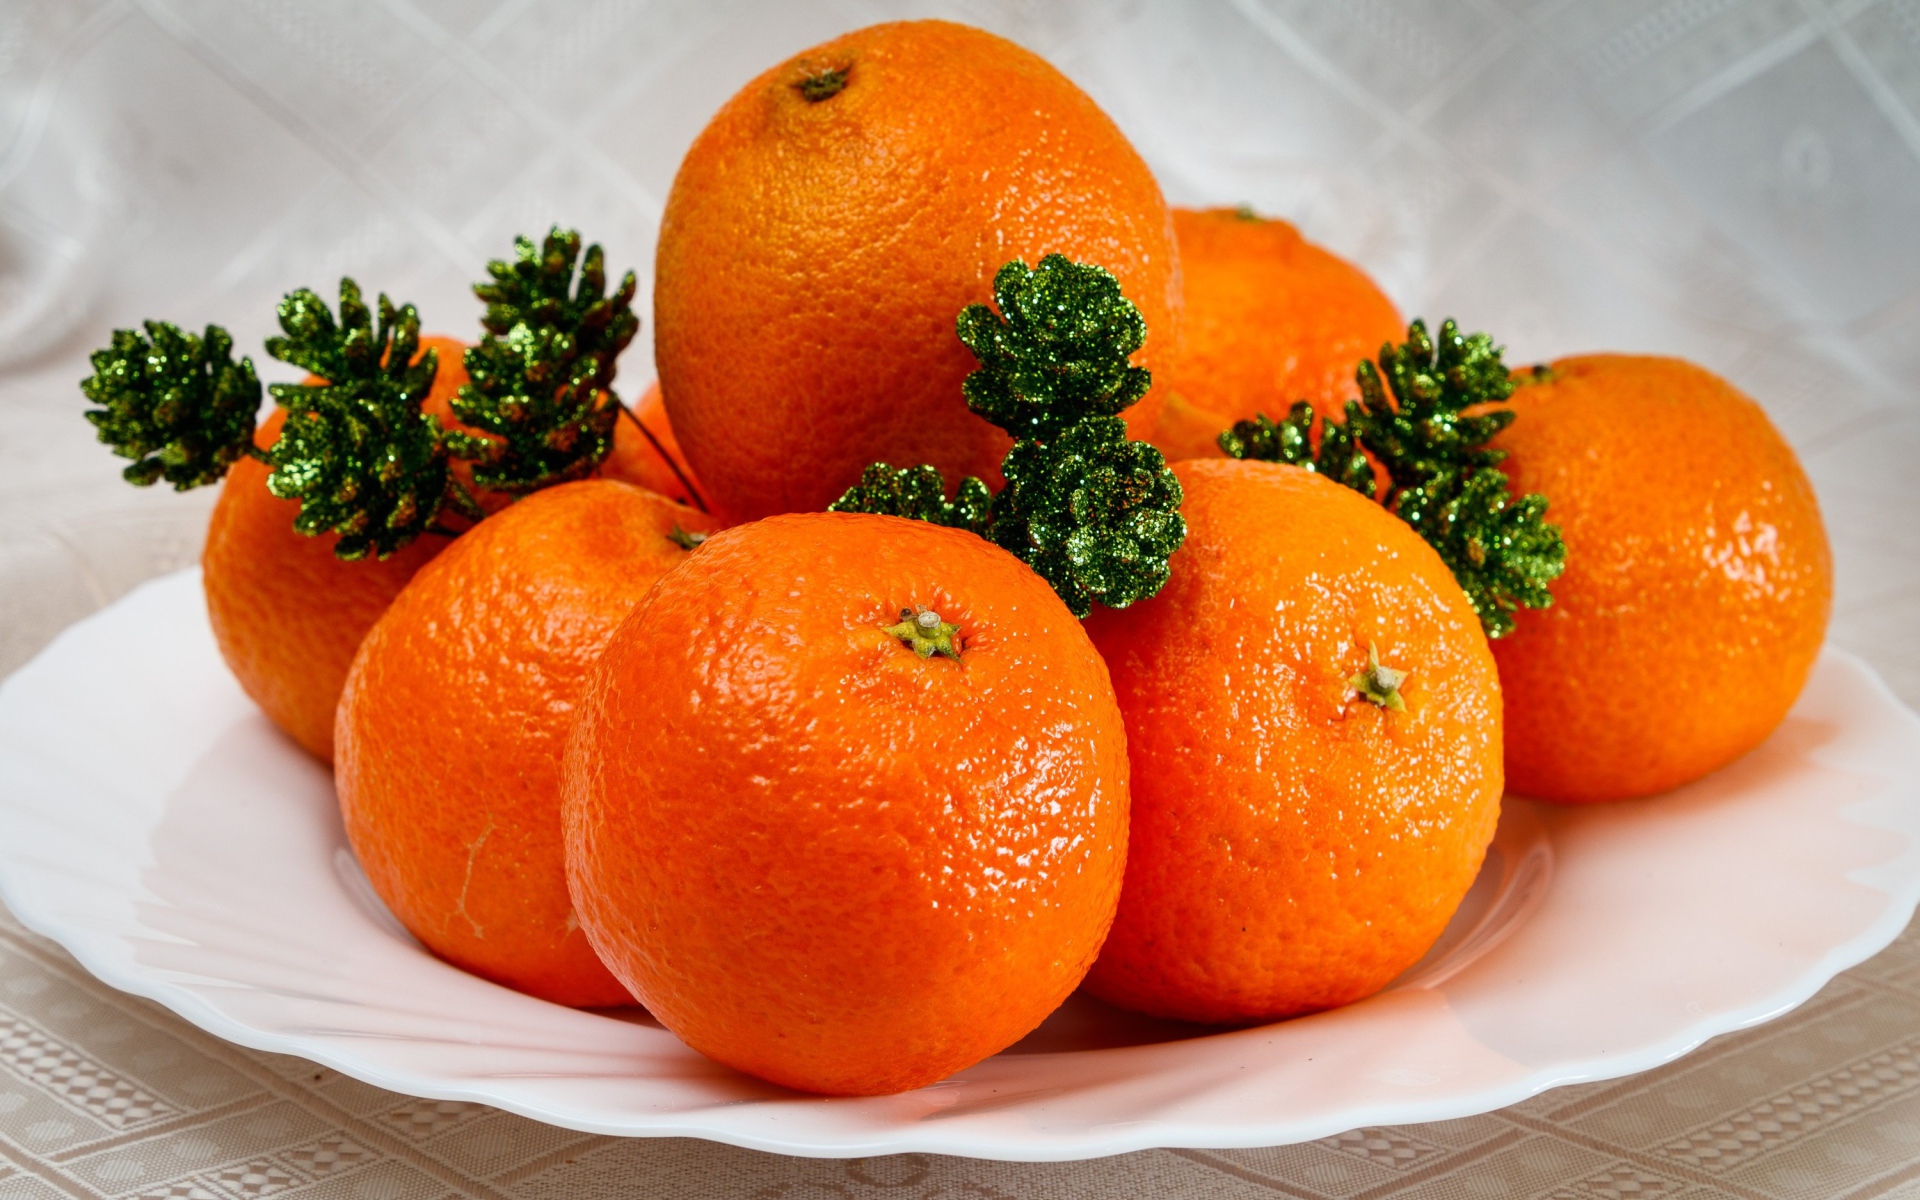 Many orange tangerines on a plate with cones